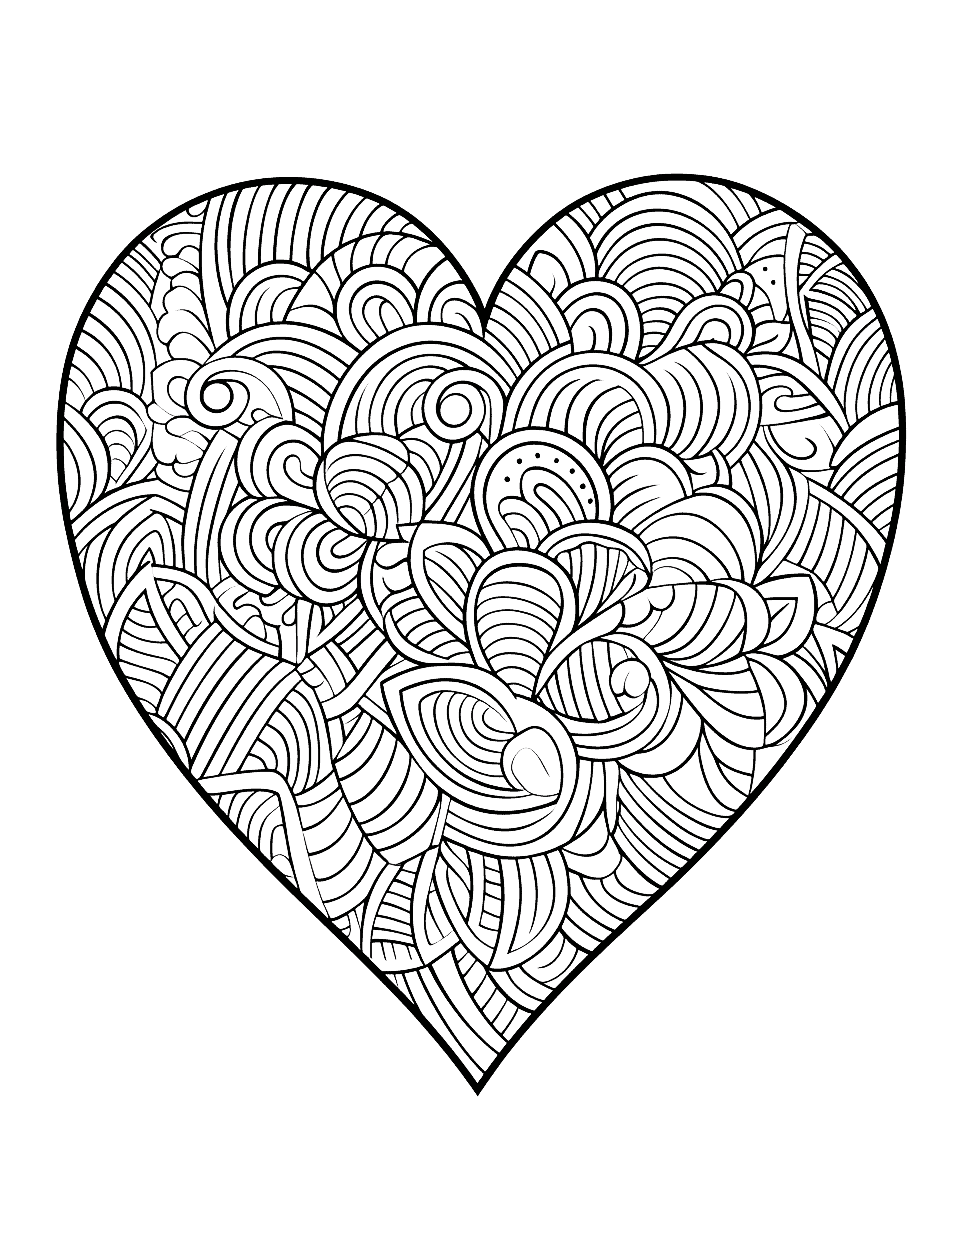 Patterned Heart Coloring Page - A heart with intricate patterns inside for a fun coloring challenge.